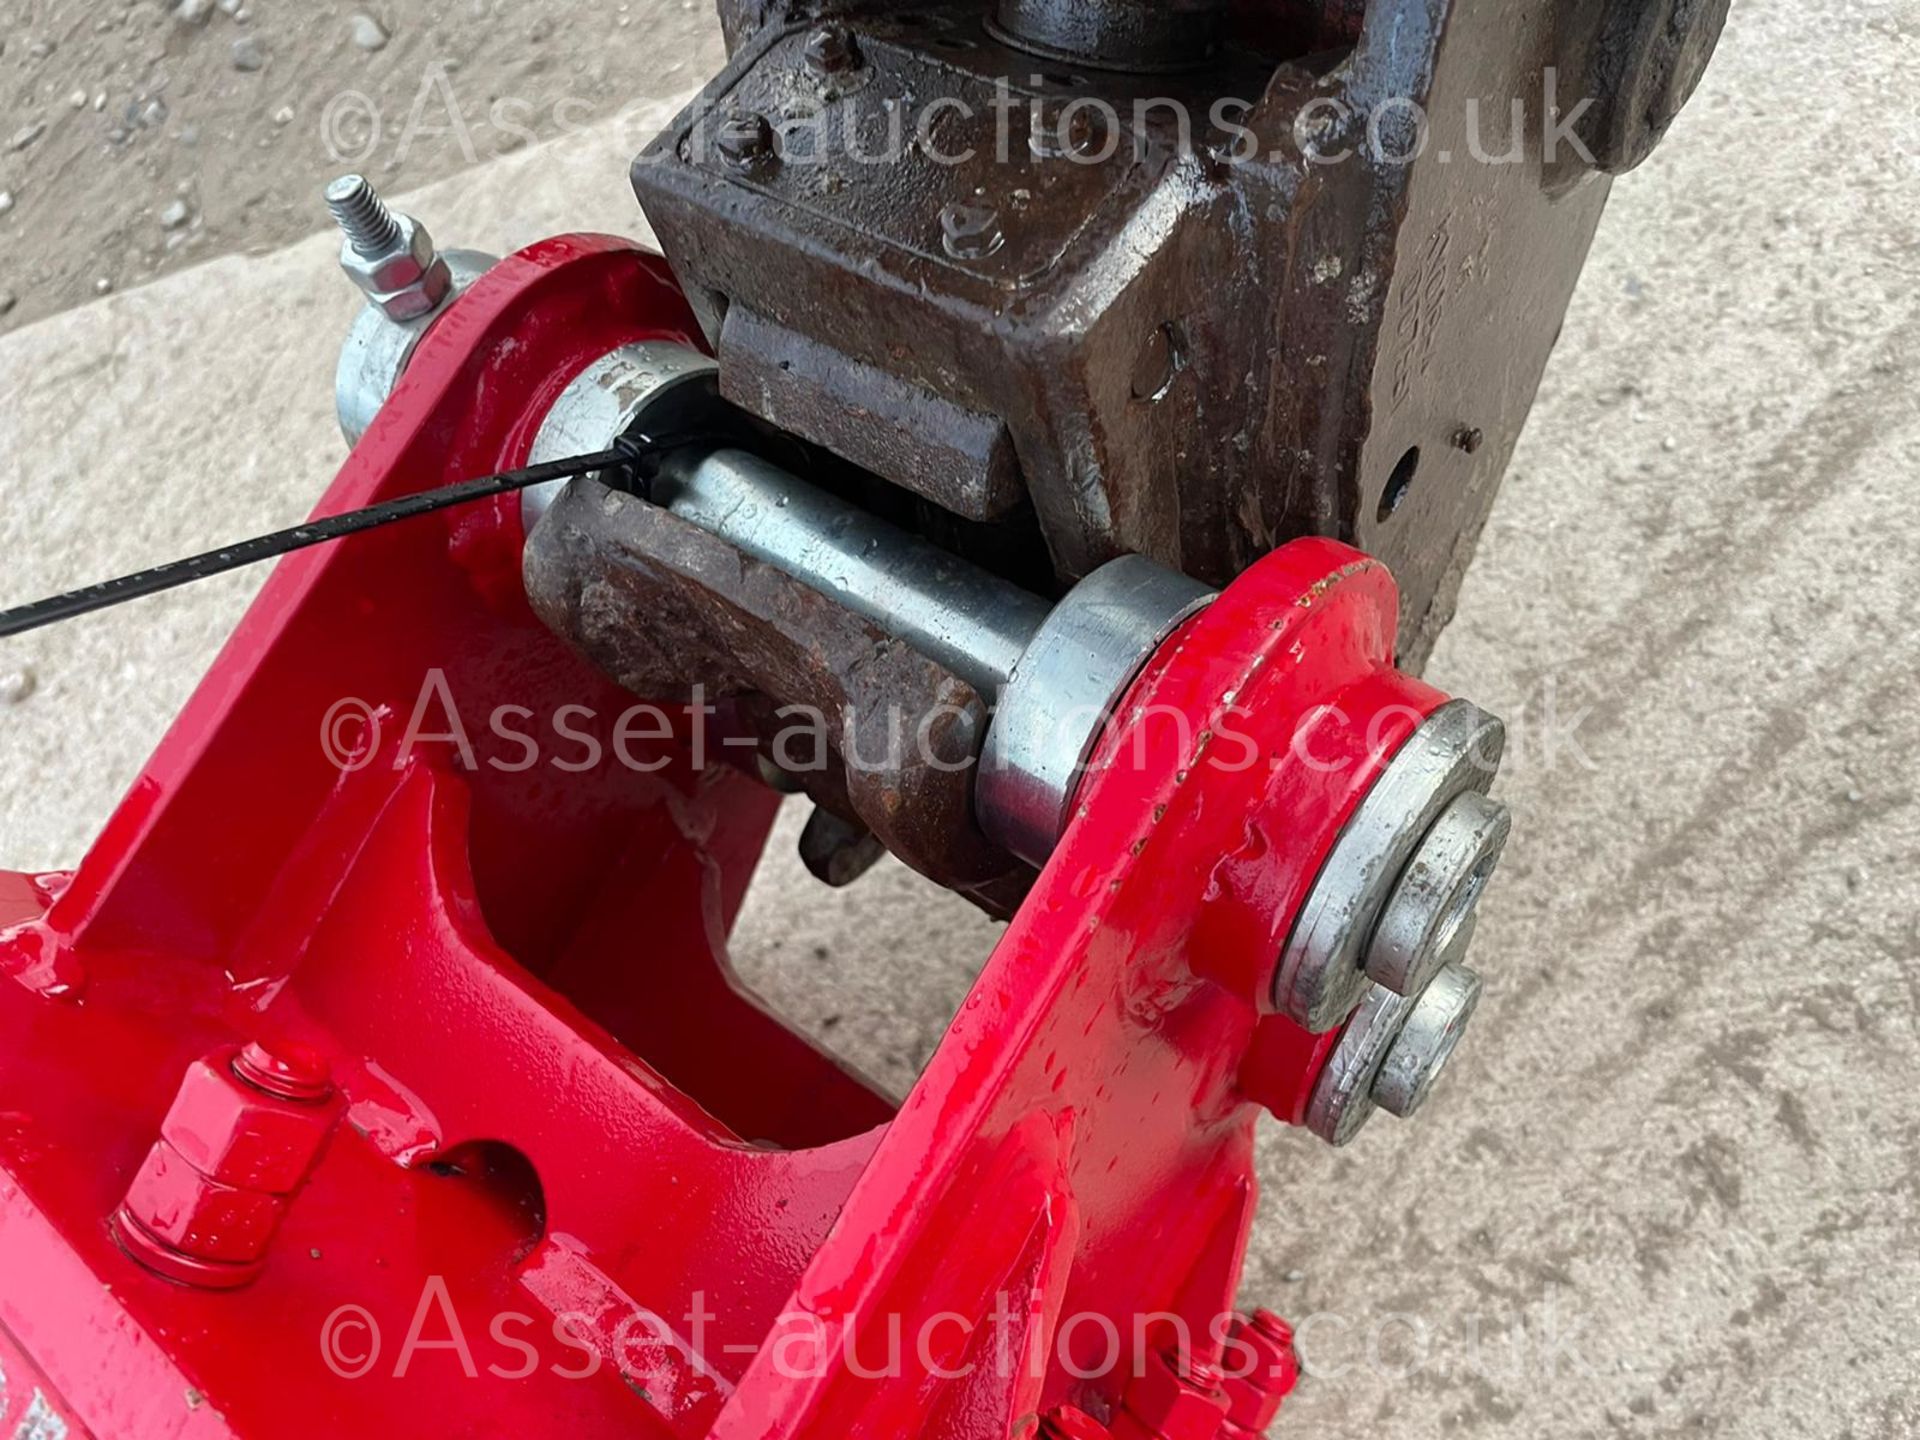 NEW AND UNUSED ES MANUFACTURING ESB00 ROCK BREAKER, CHISEL IS INCLUDED, 30MM PINS *PLUS VAT* - Image 2 of 4